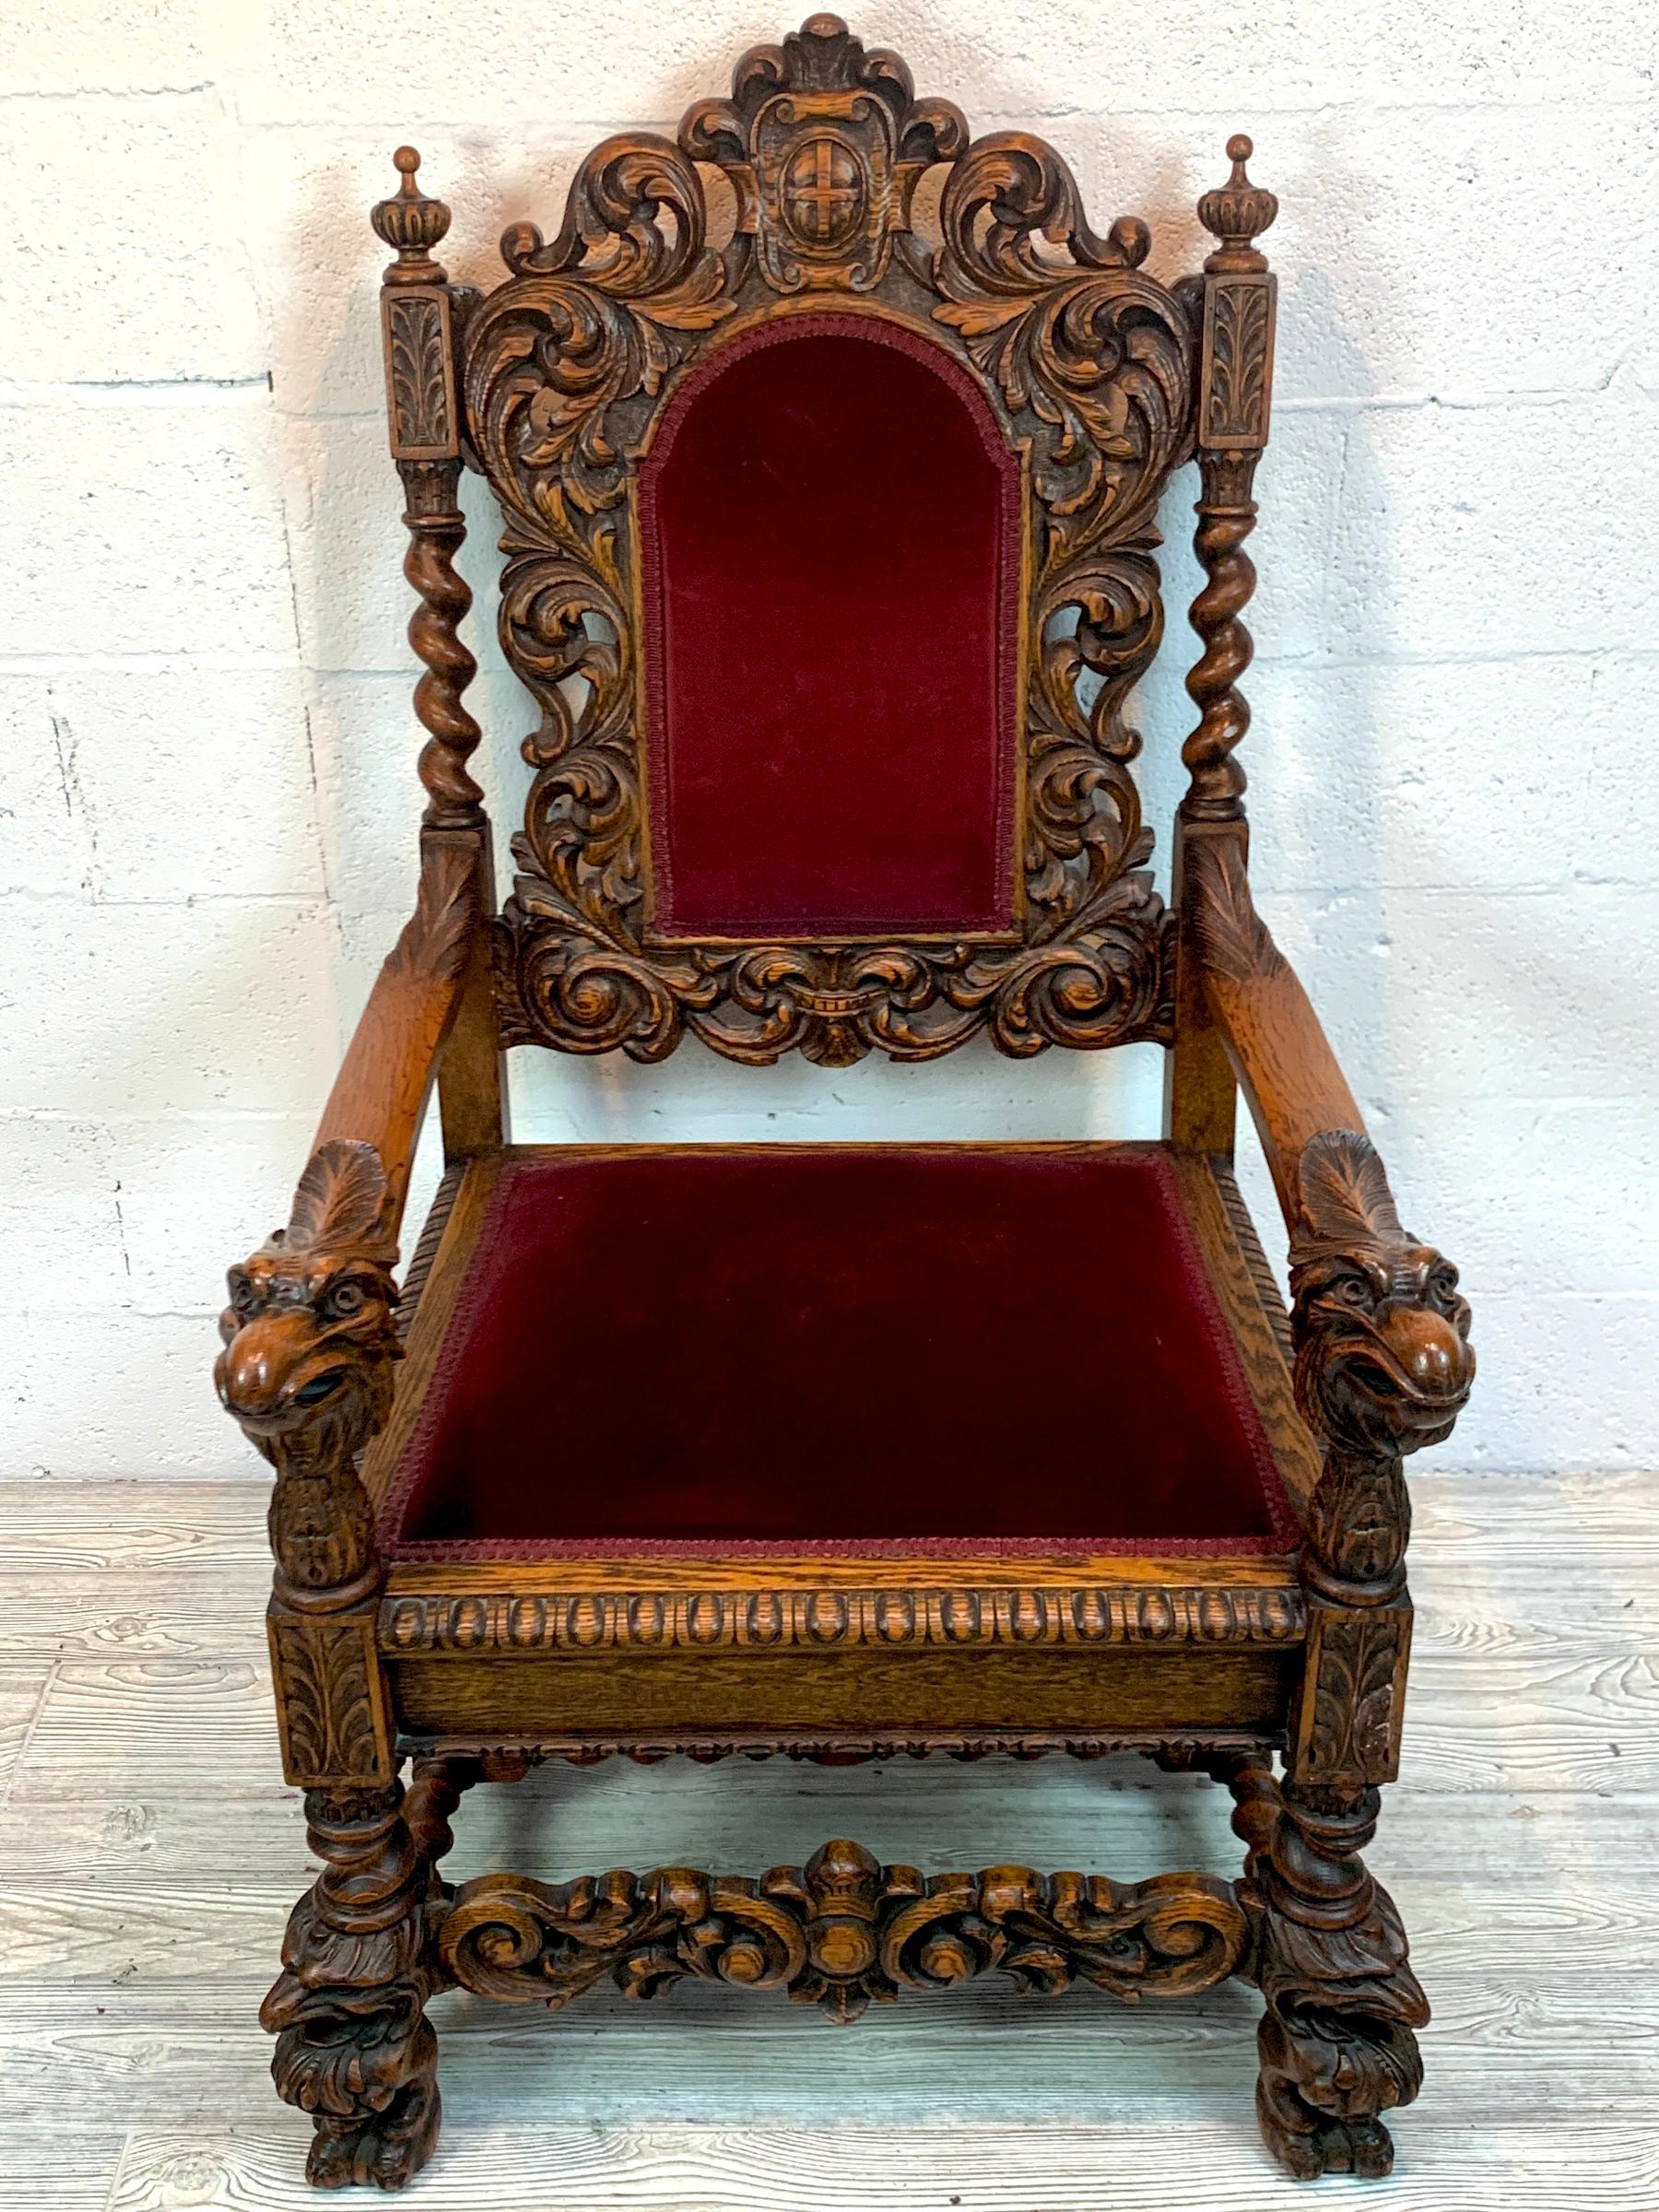 Signed American carved oak eagle motif throne chair, with barley twist and medallion carved backrest. Each armrest has carved 11